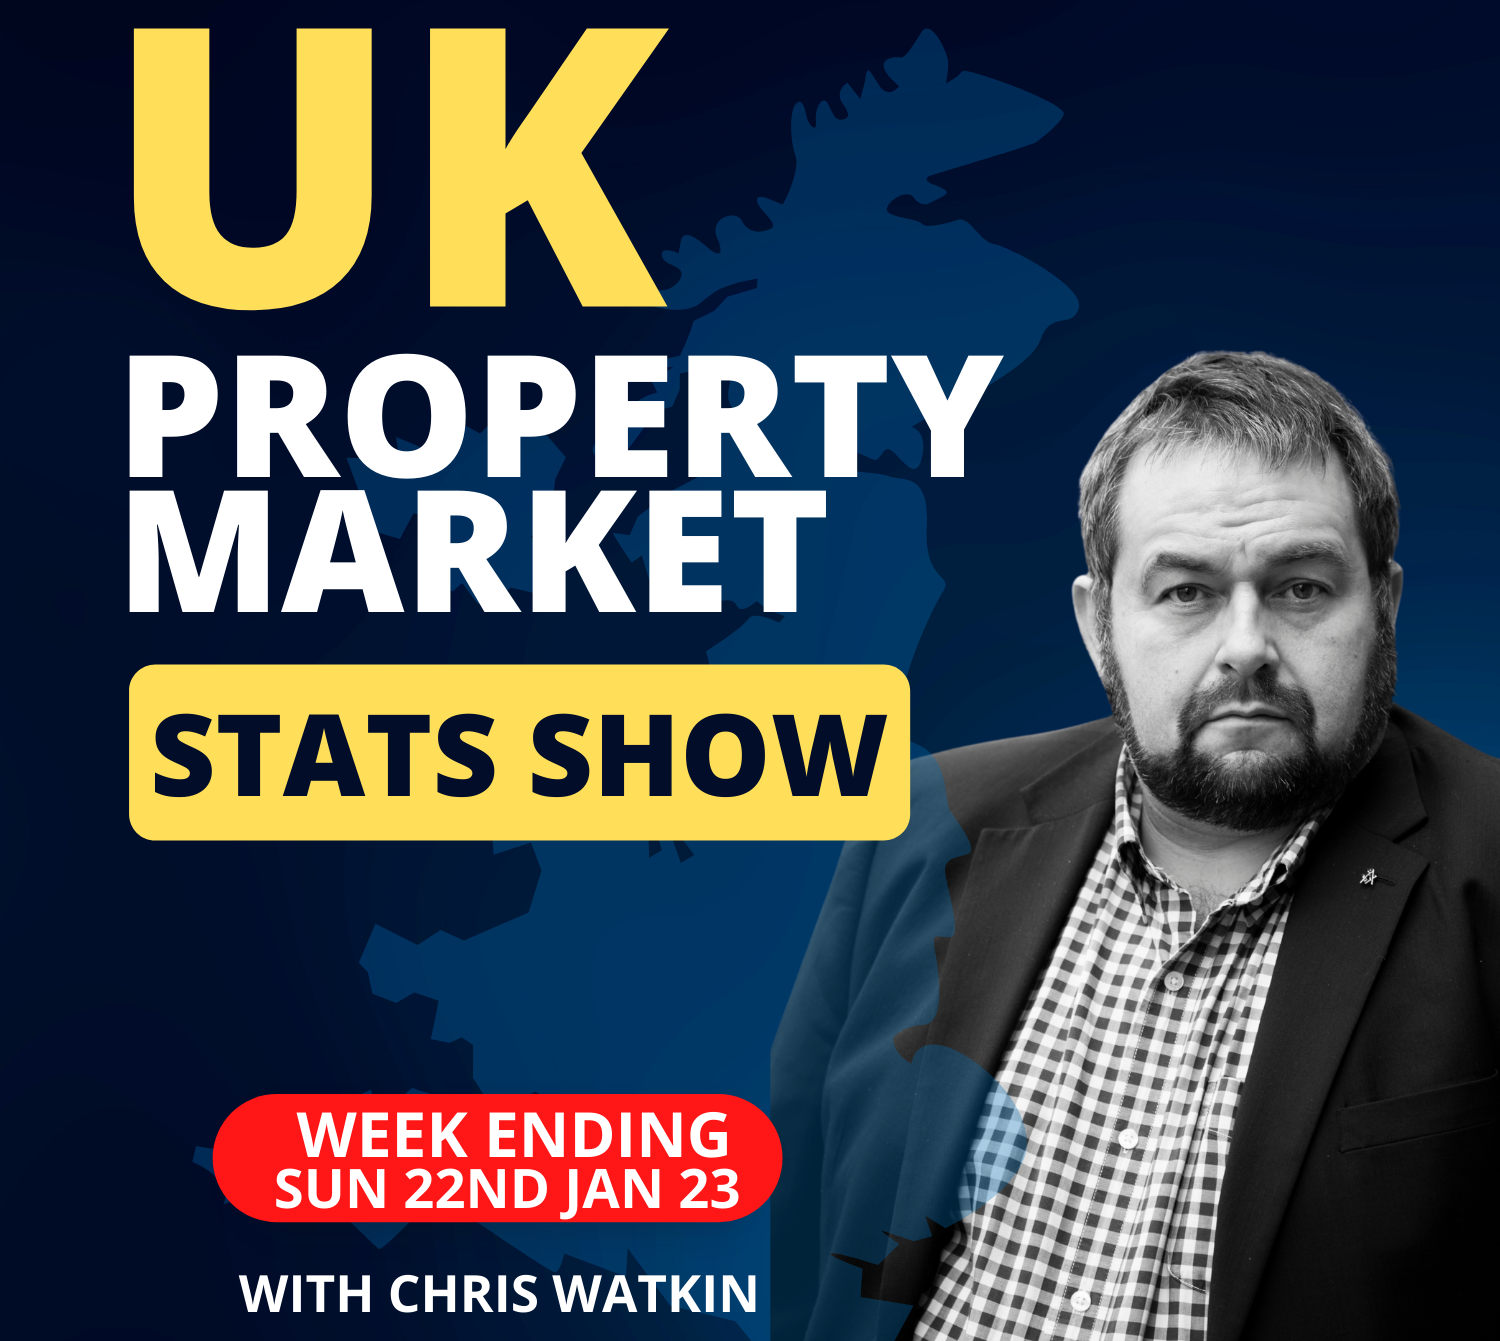 What Is Actually Happening In The UK Property Market?